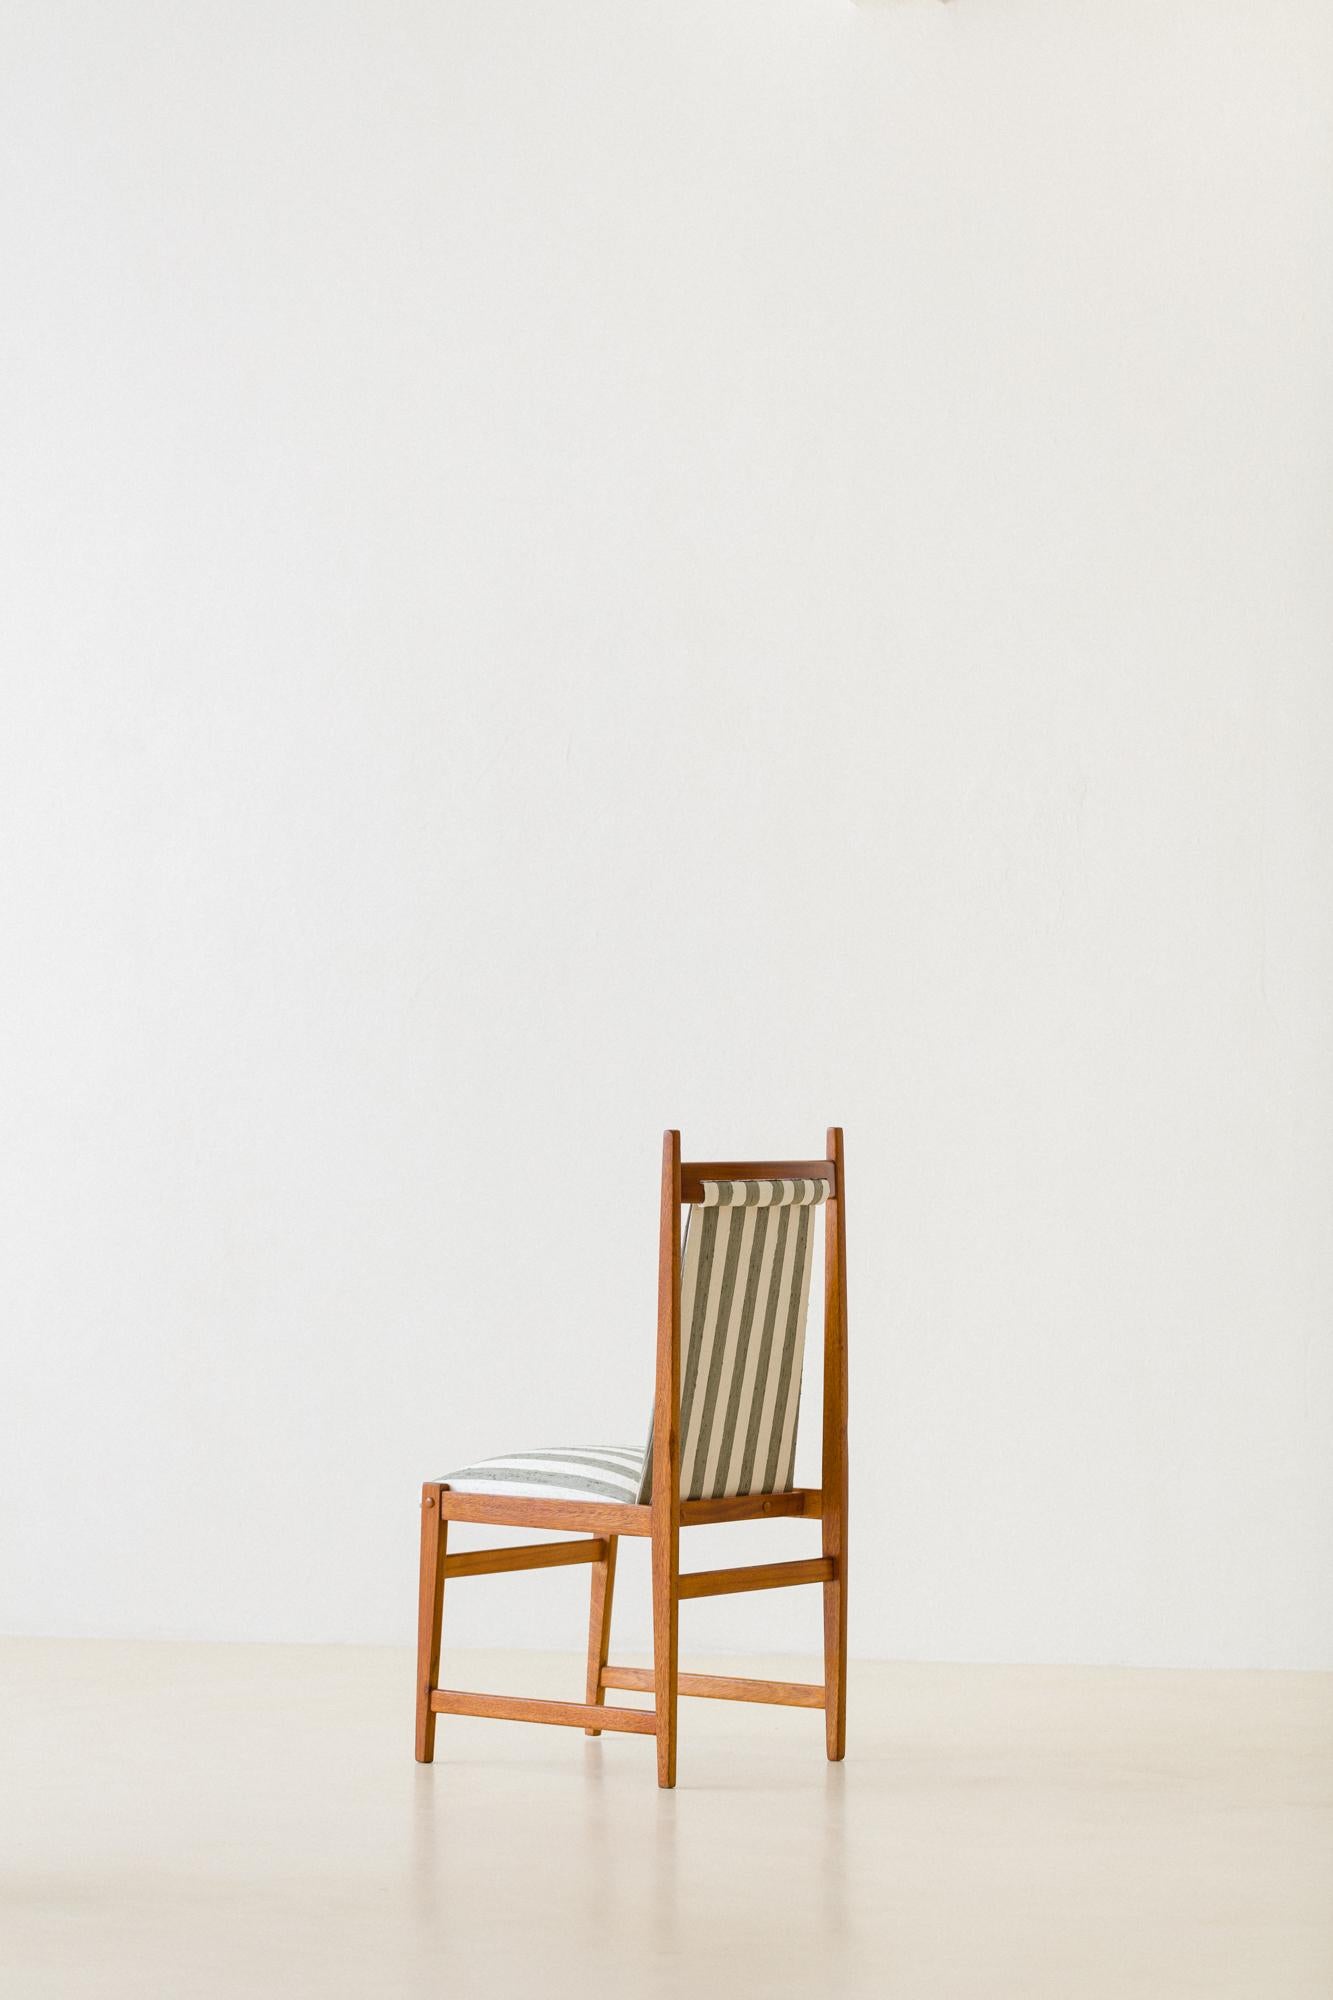 Set of Six Dining Chairs, by Celina Decorações, 1960s, Brazilian Midcentury For Sale 1